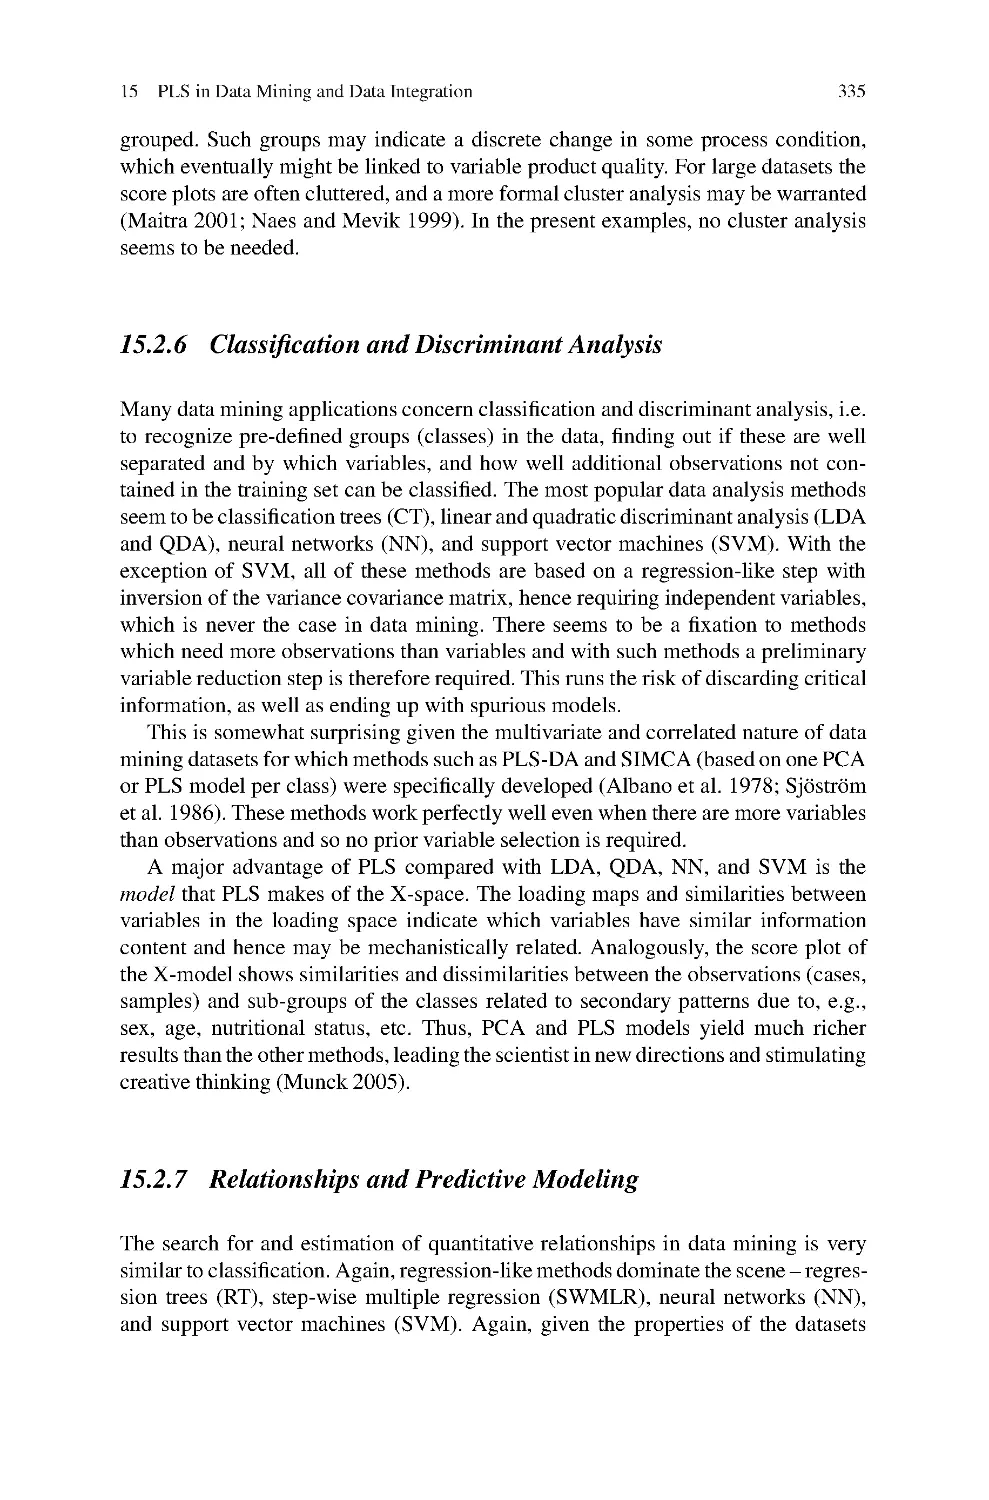 15.2.6 Classification and Discriminant Analysis
15.2.7 Relationships and Predictive Modeling